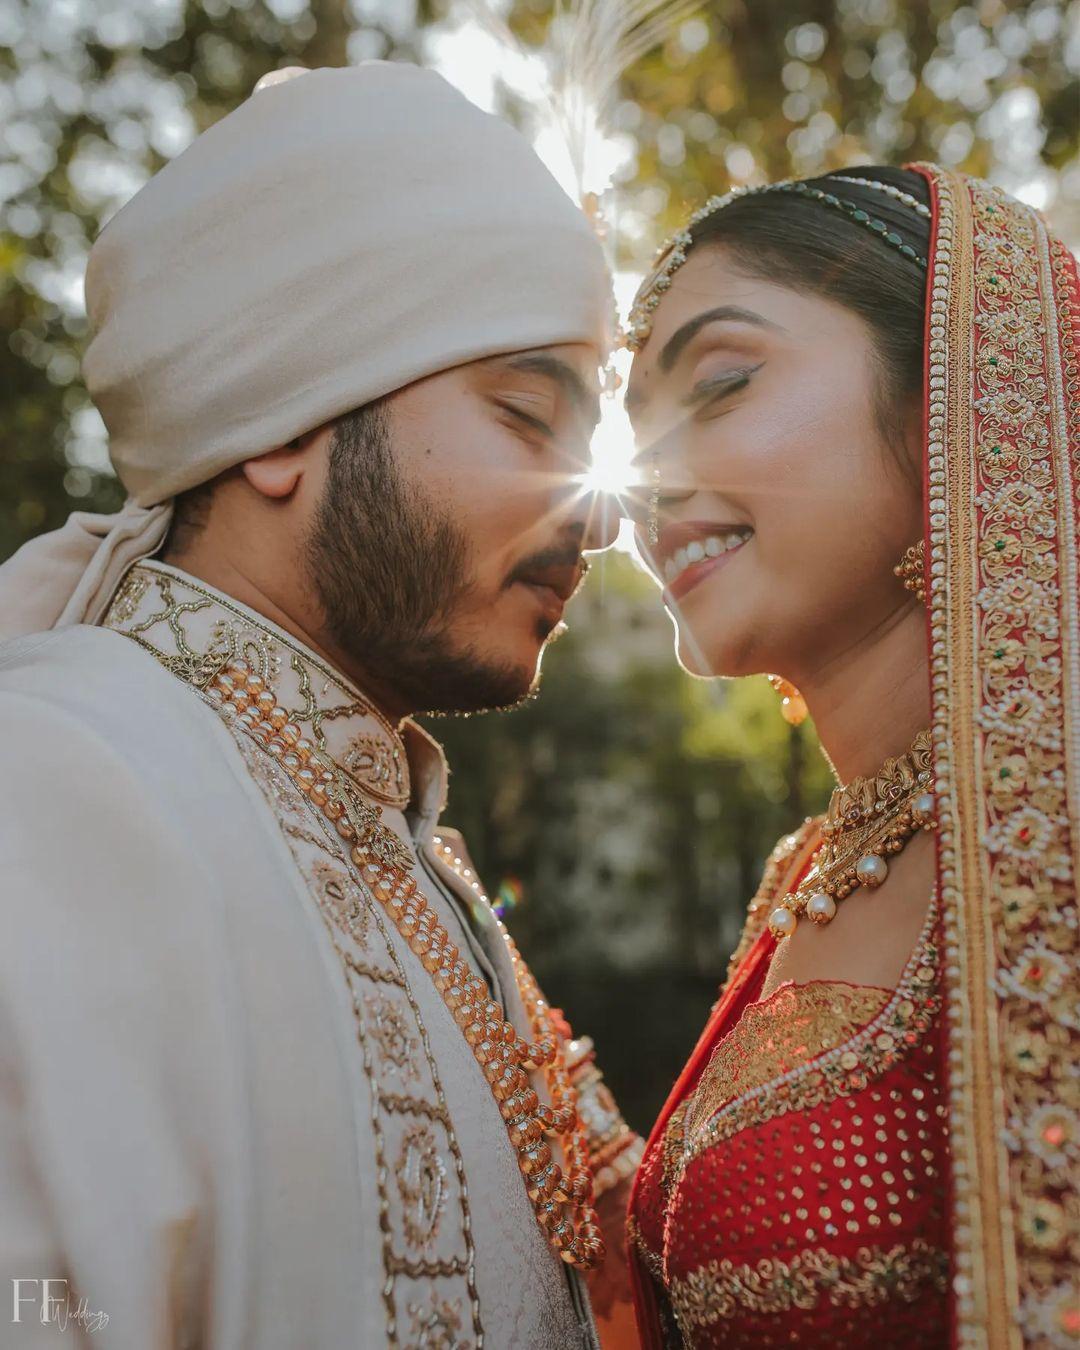 Shaadidukaan.com: Gorgeous Solo Bride Poses for Your Wedding: Charm up,  level up The Oomph Factor | Milled